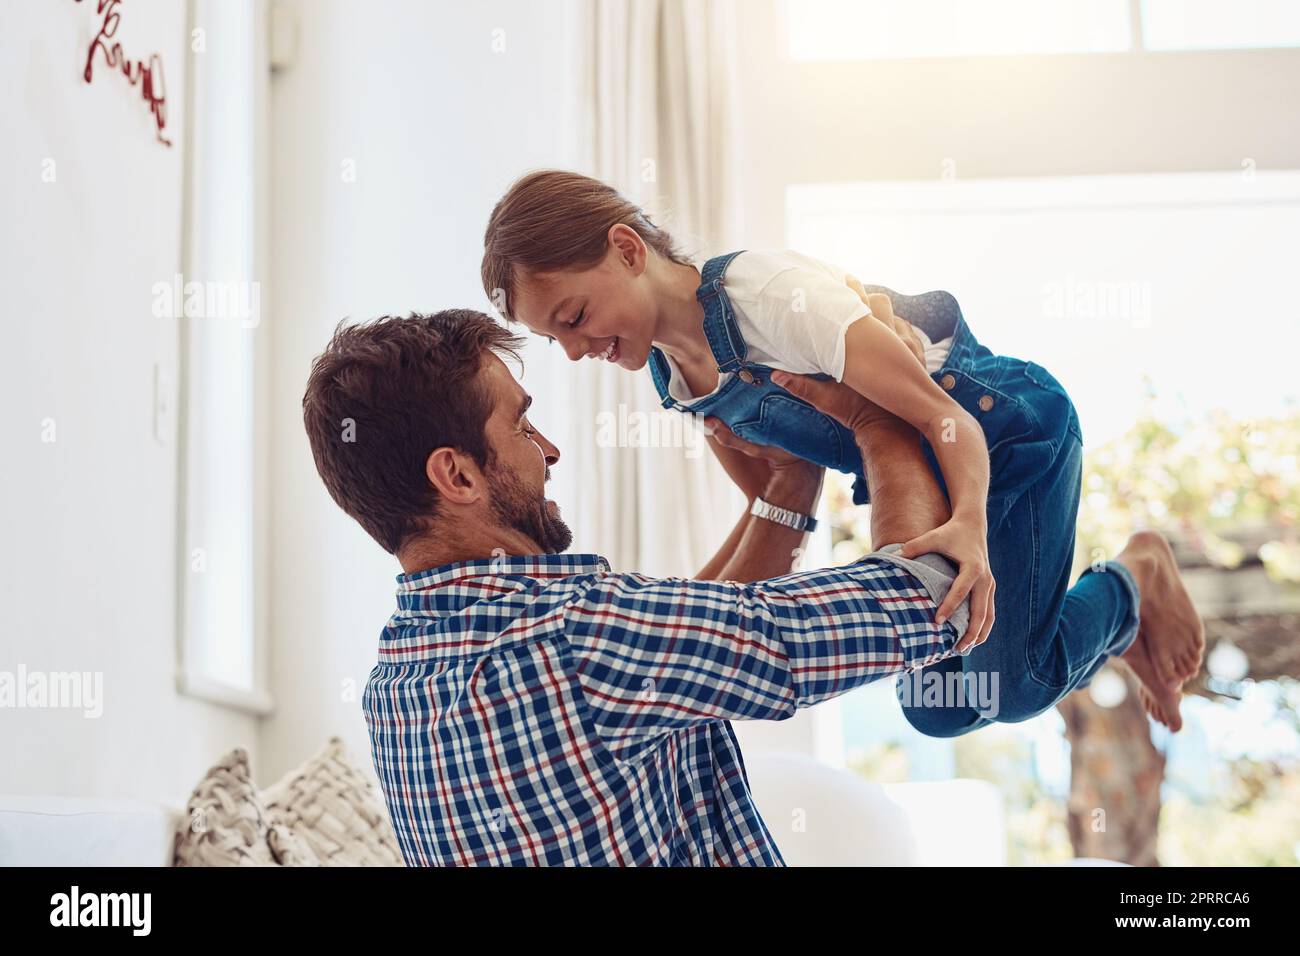 You light up my world like nobody else. an adorable little girl spending time with her father at home Stock Photo